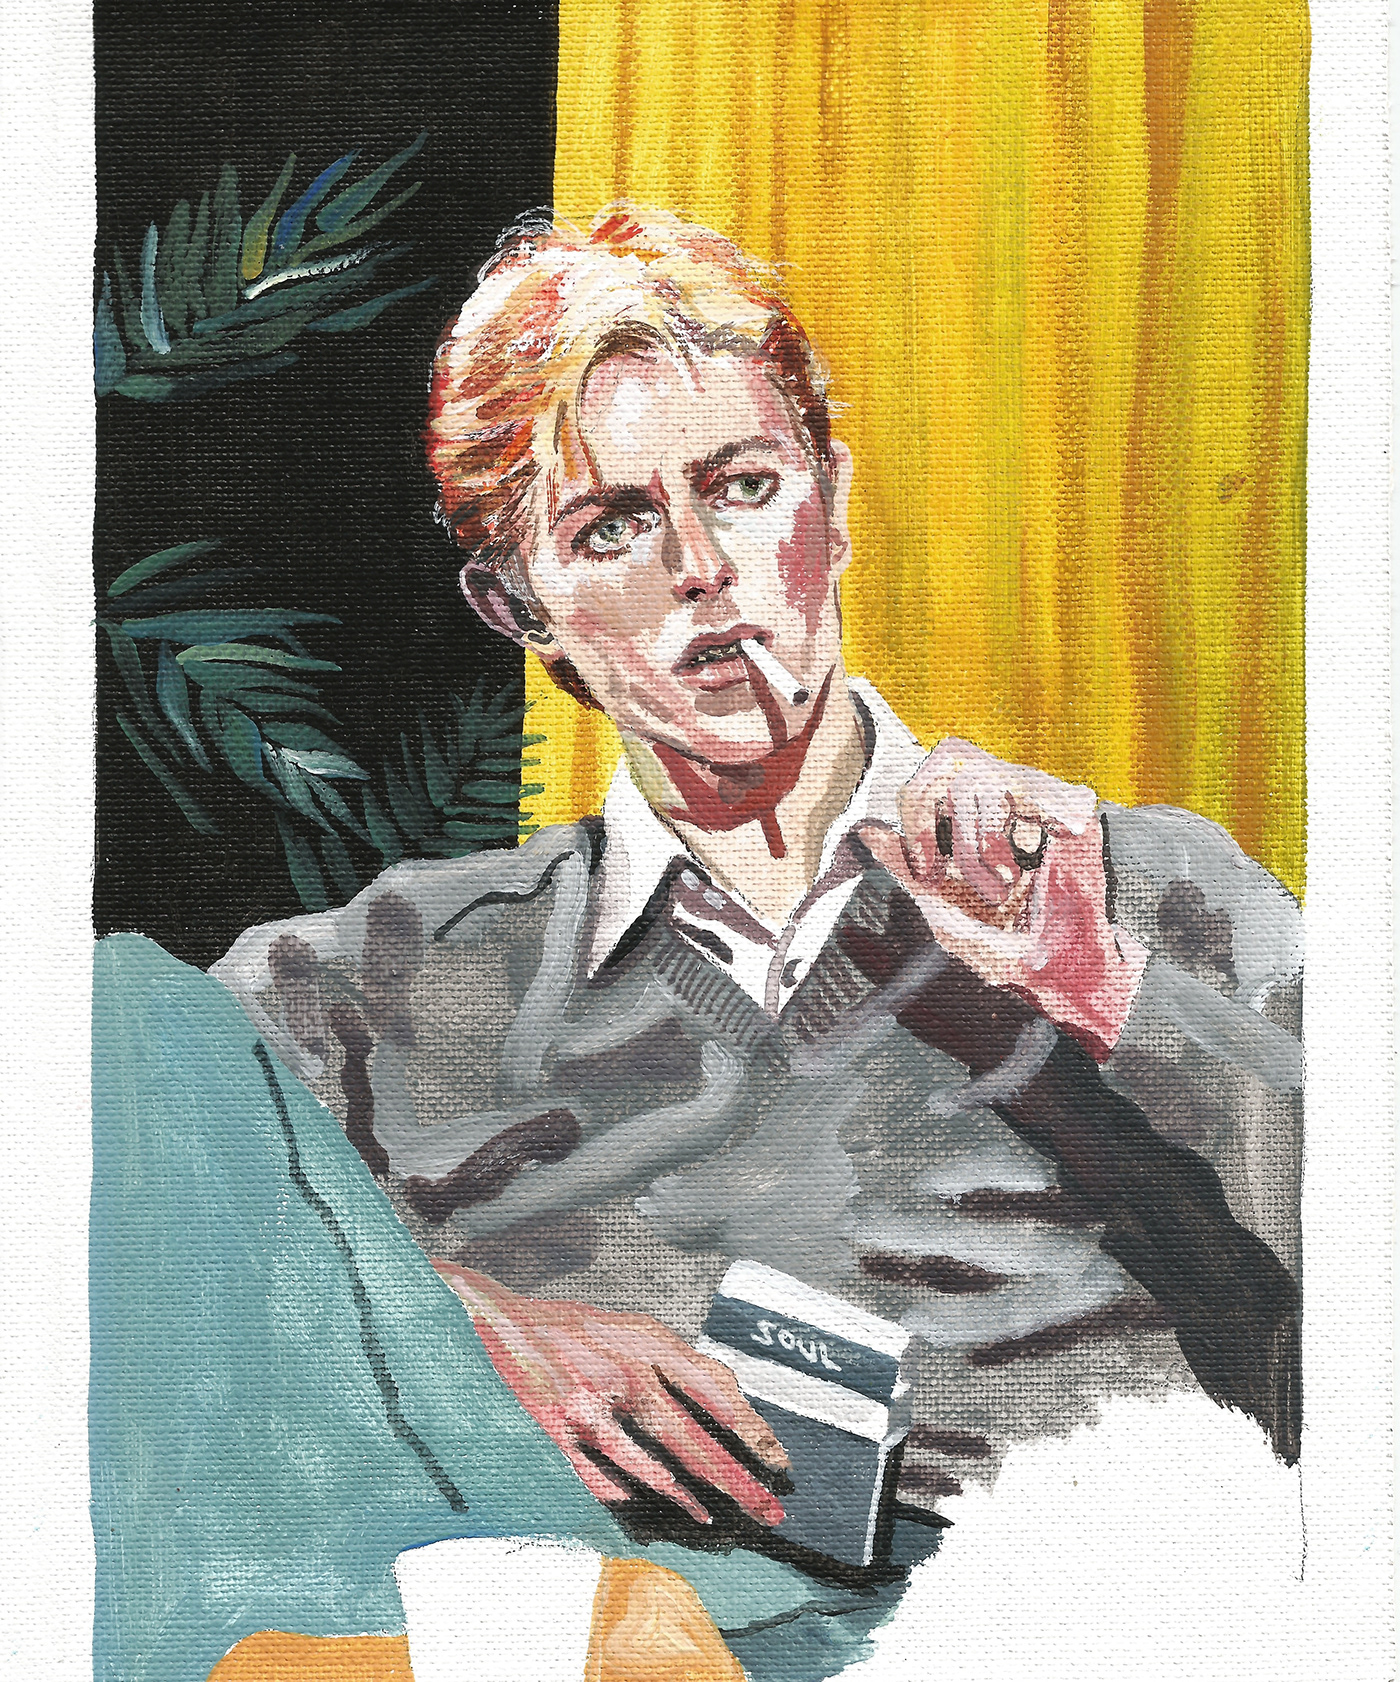 acrylic acrylic painting painting   kiss david bowie black mirror colors THE LOBSTER movie